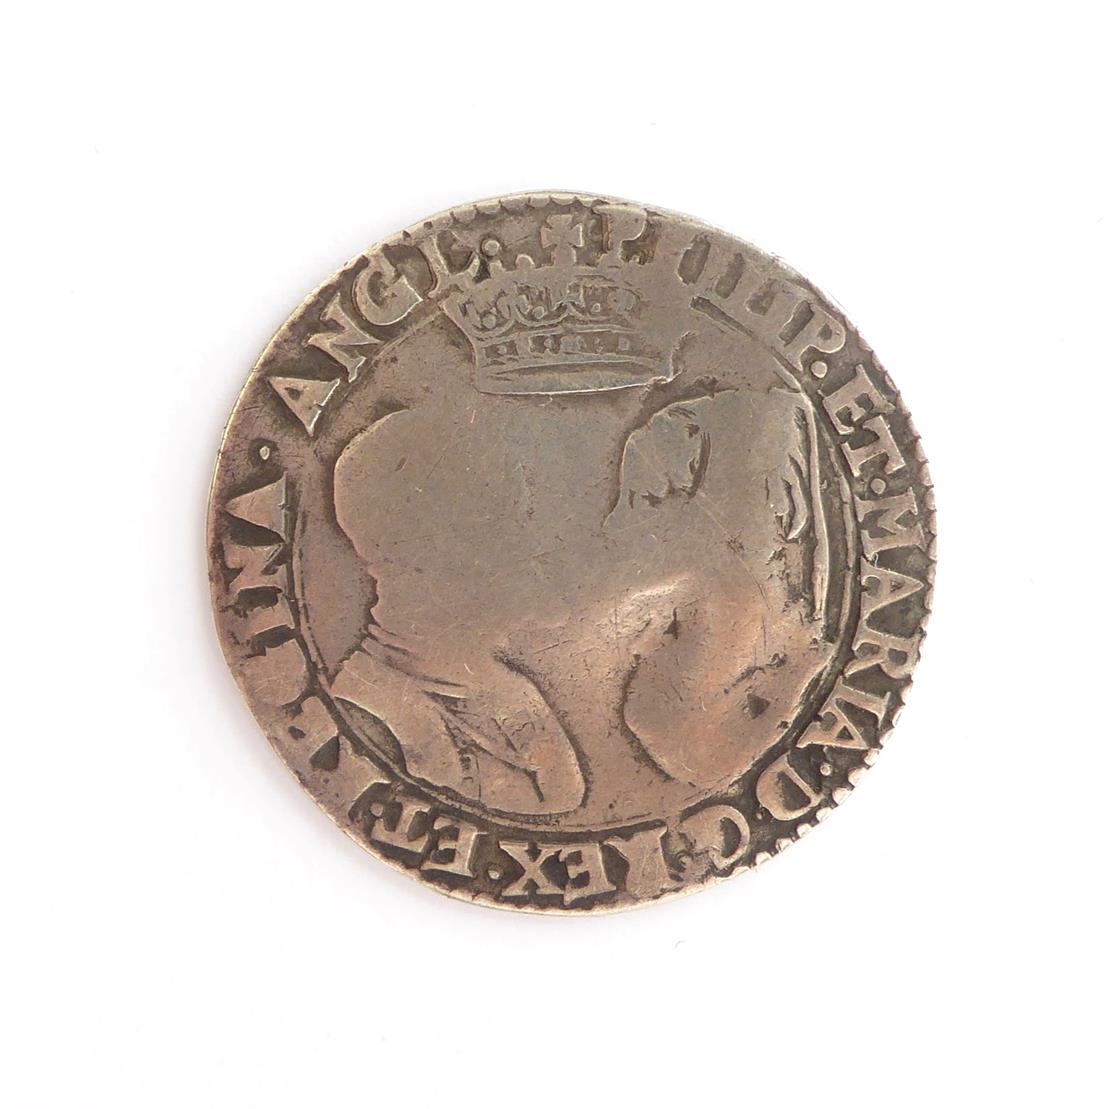 Lot 2155 - Philip & Mary Shilling, crowned facing busts, English titles only, undated with mark of value;...